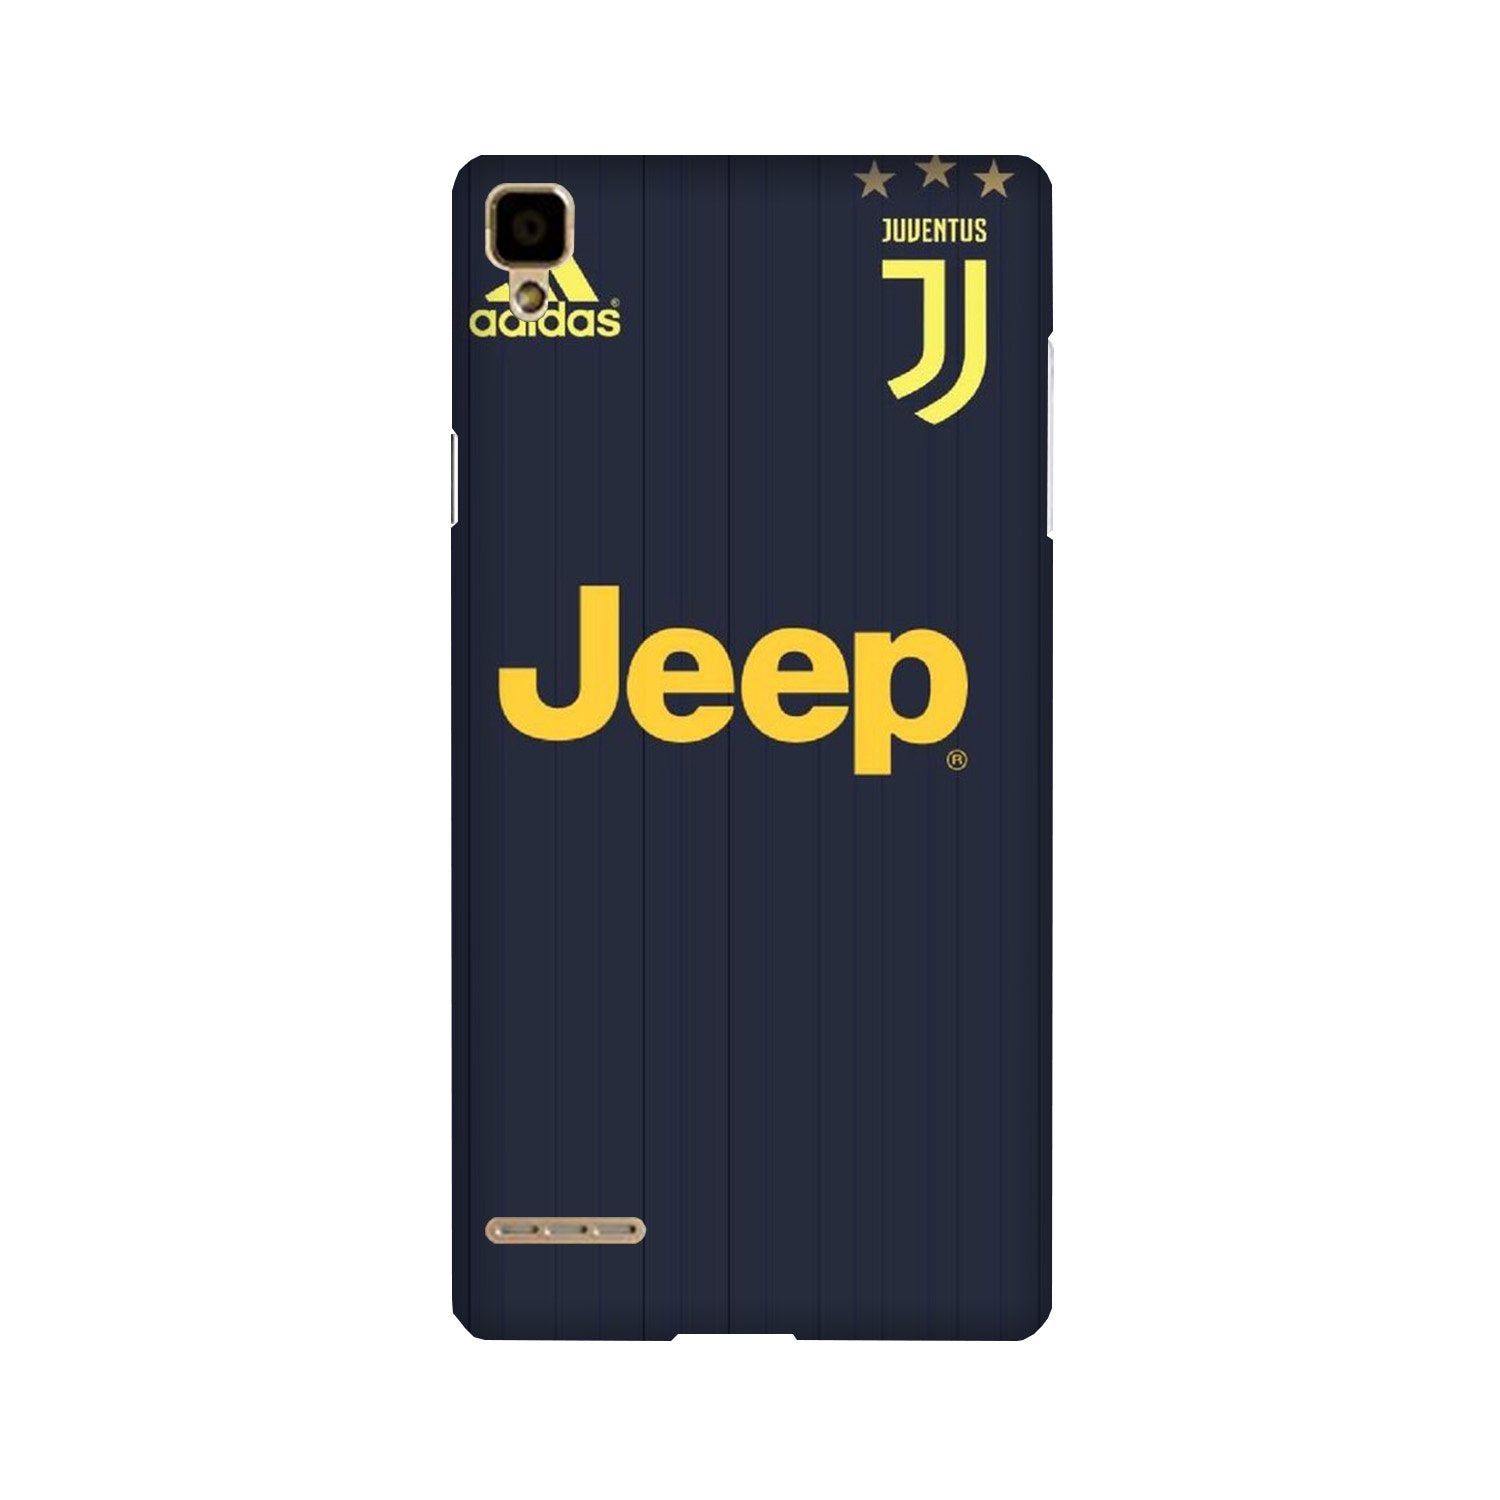 Jeep Juventus Case for Oppo F1  (Design - 161)